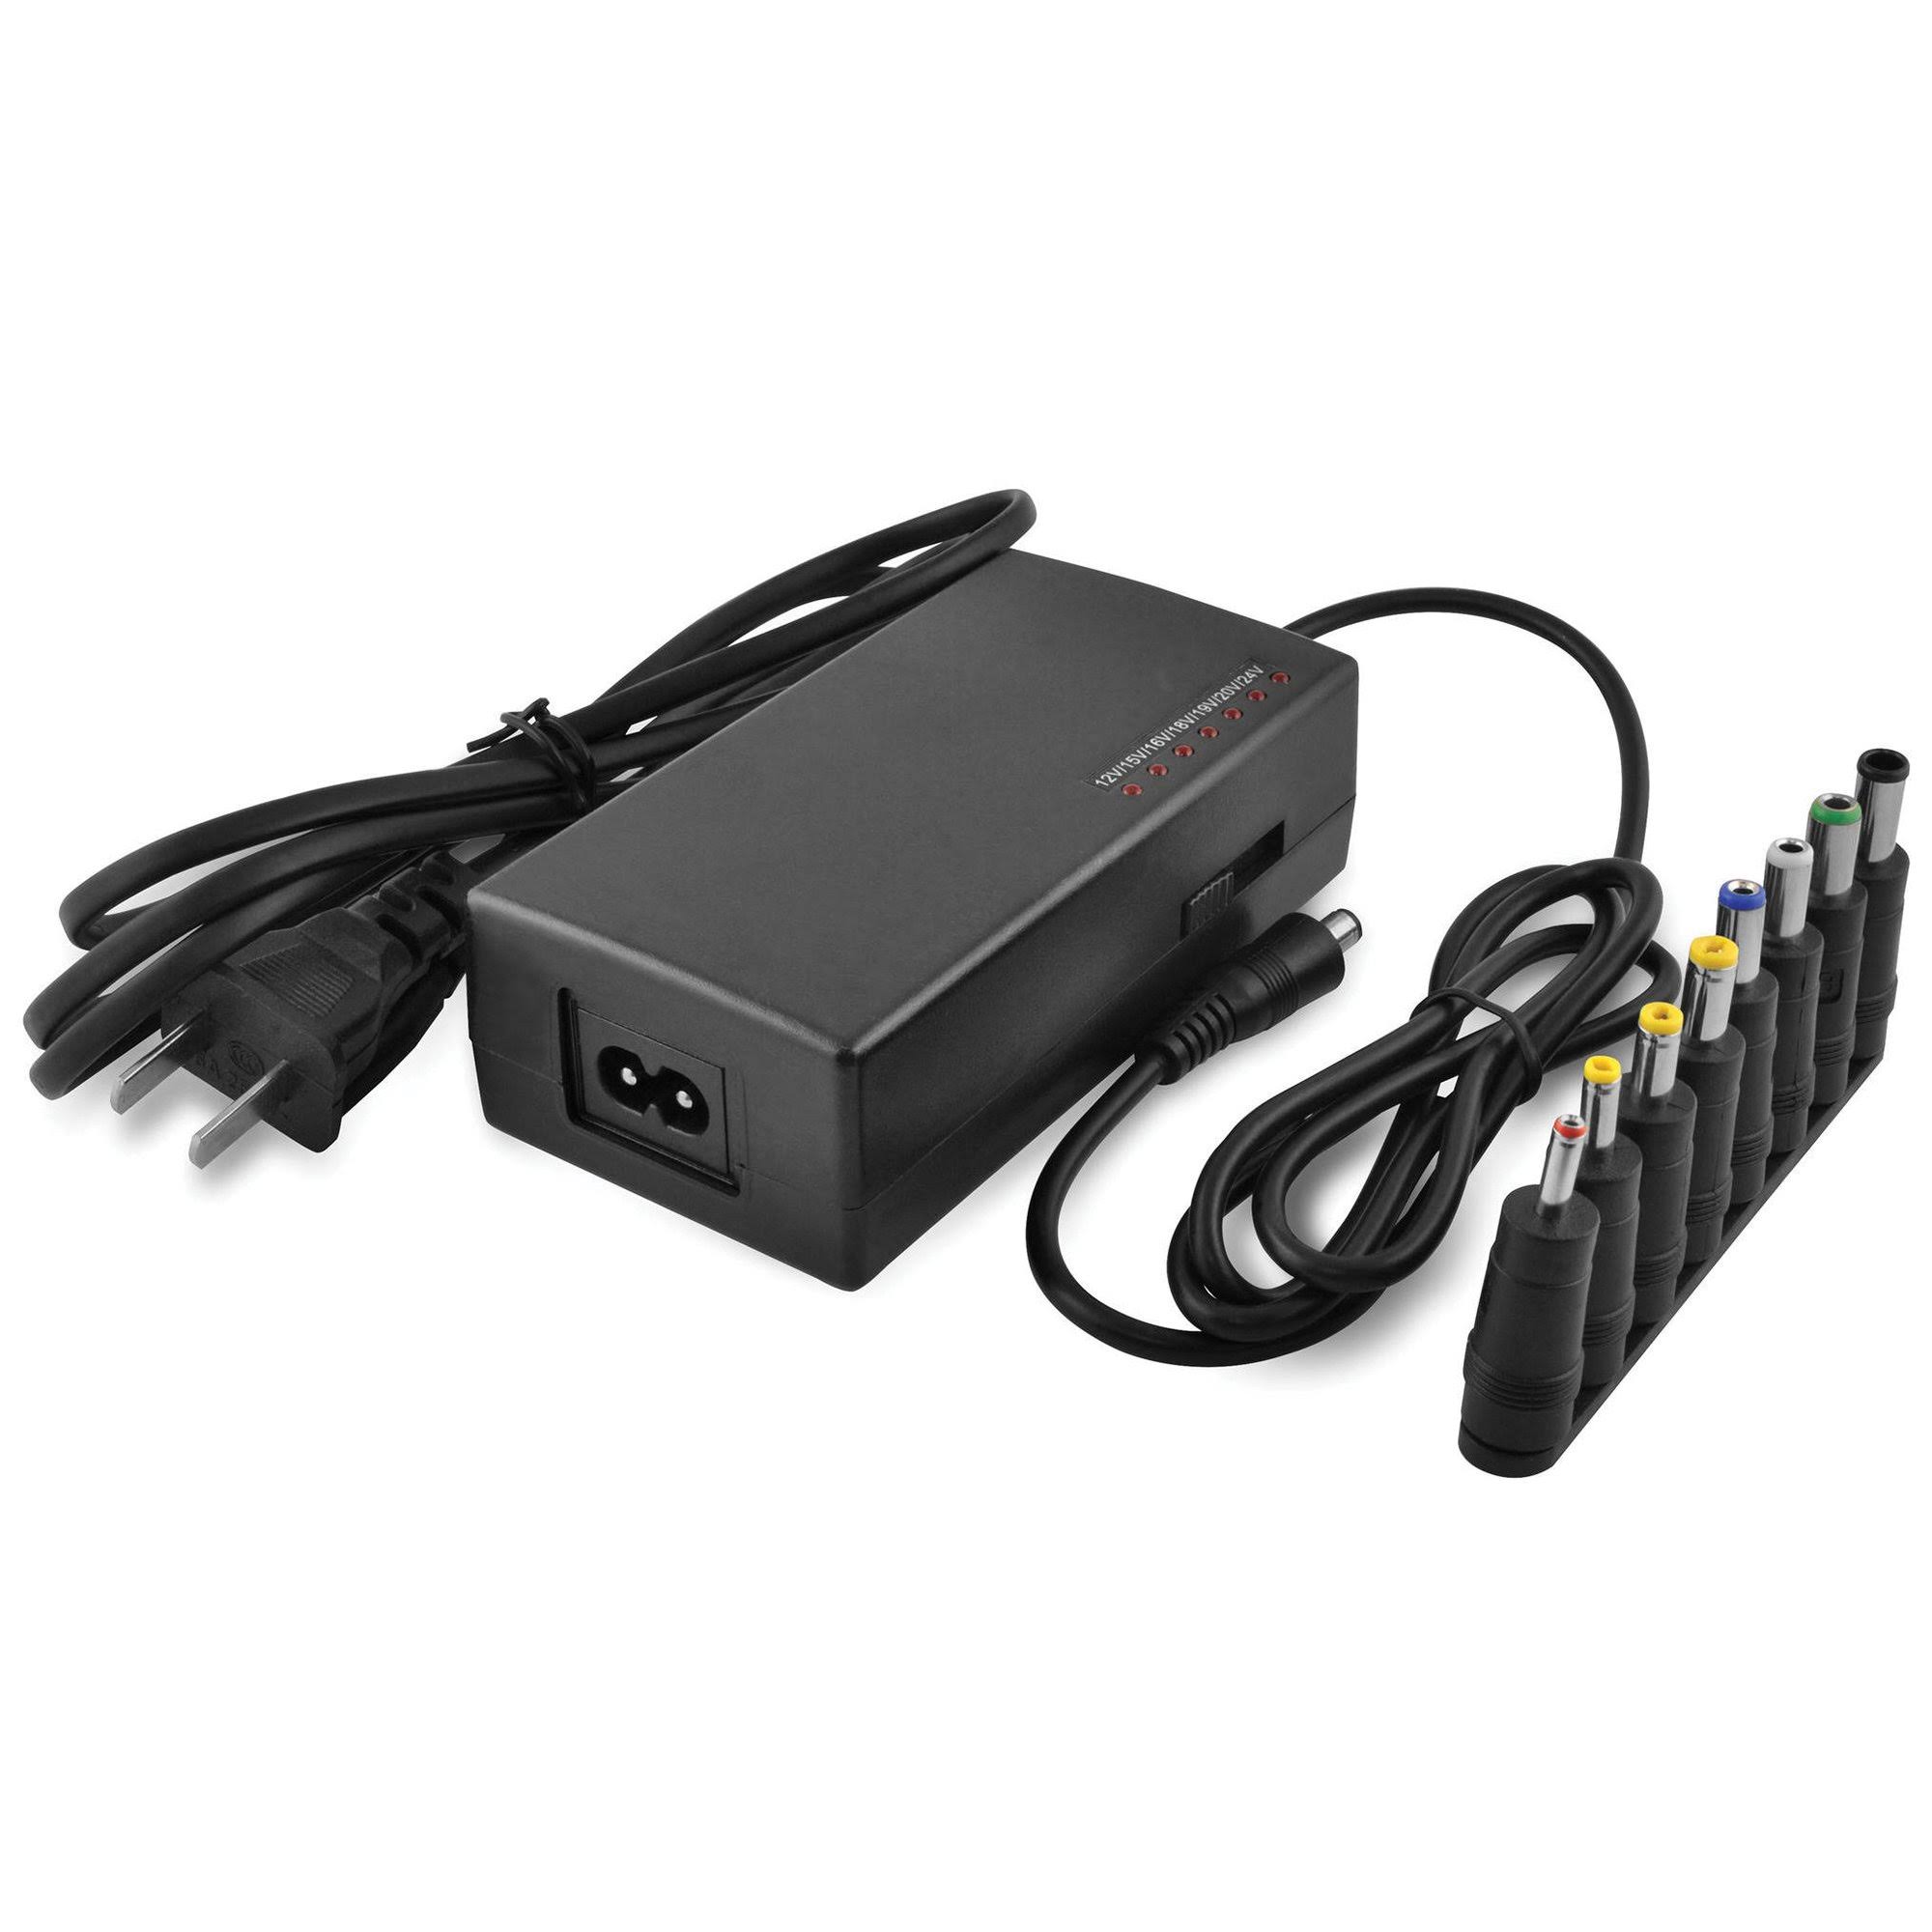 Ematic 60W UNVERSL Laptop Charge